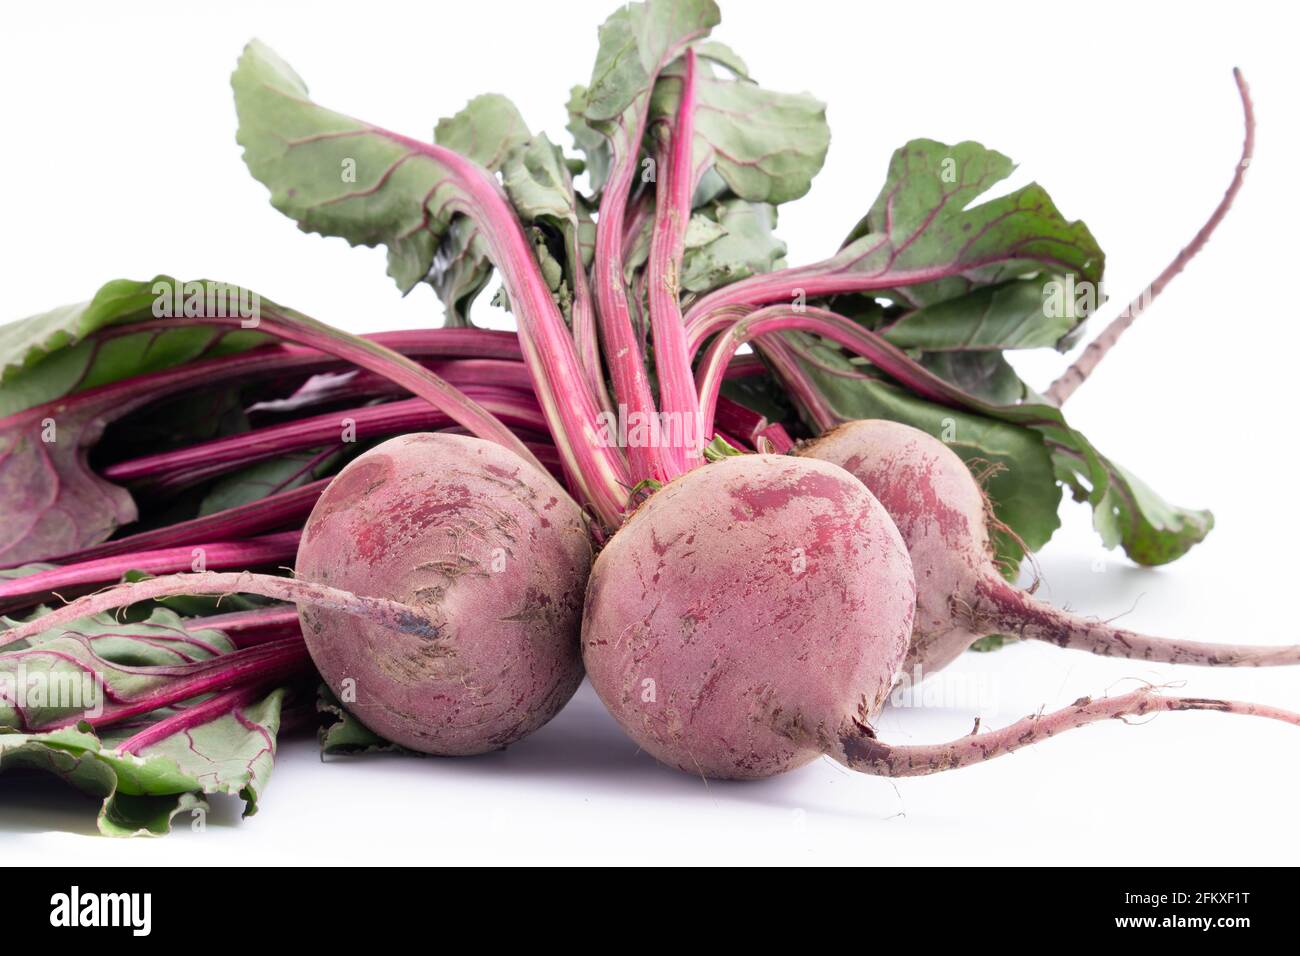 Beetroot Desi Chukandar With Green Leaves Is Consumed As Salad Or Juice. Rich Source Of Iron And Fibre Strengthens Liver And Helps Recover From Iron D Stock Photo